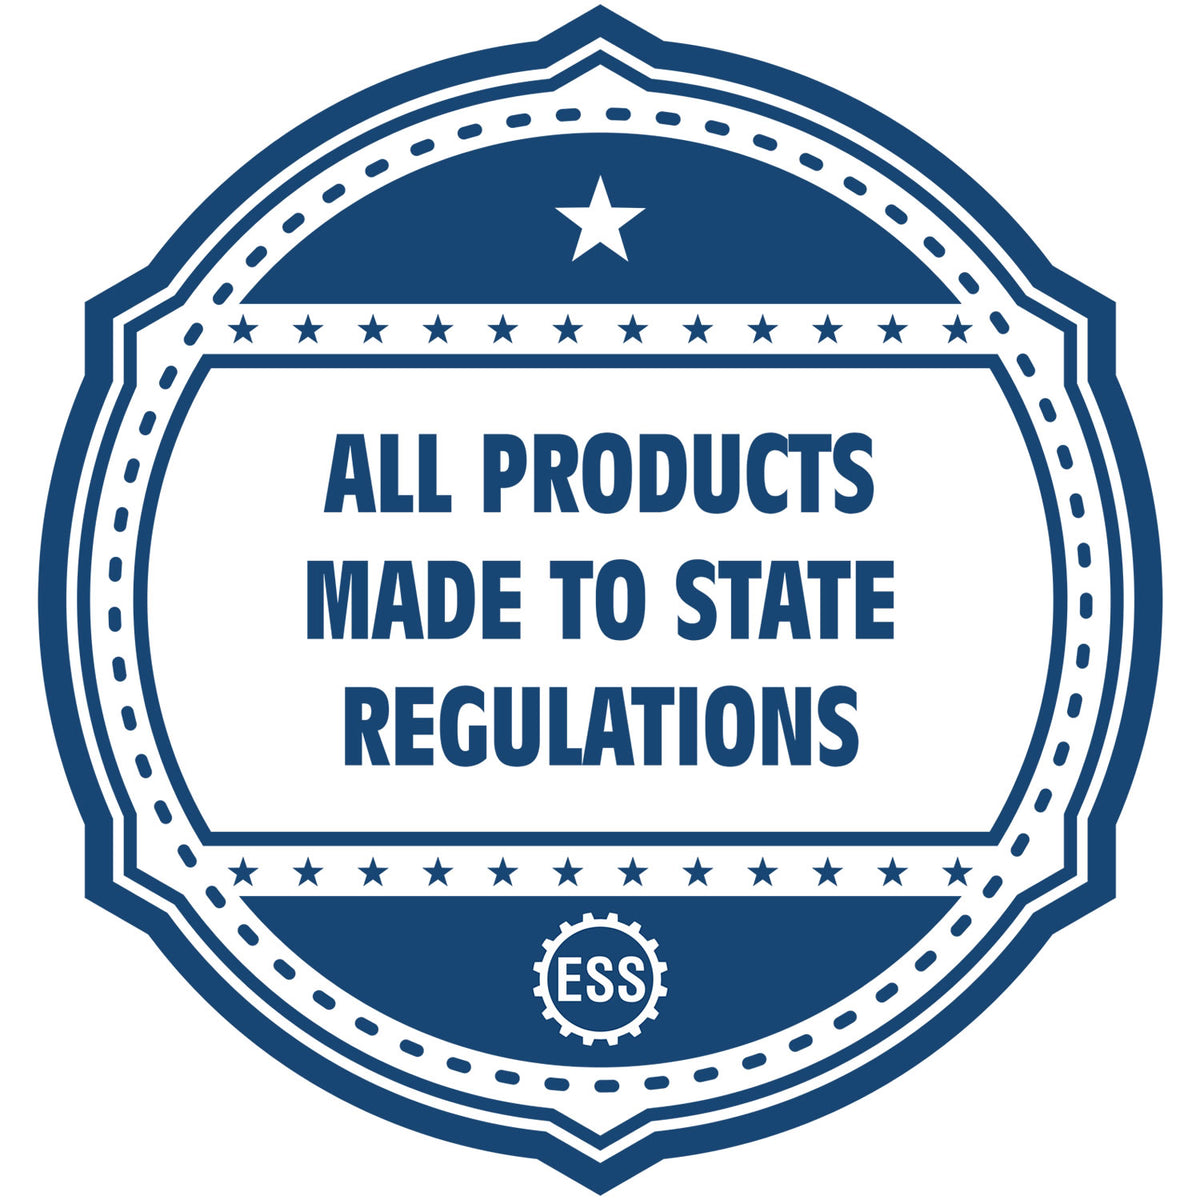 An icon or badge element for the Iowa Desk Surveyor Seal Embosser showing that this product is made in compliance with state regulations.